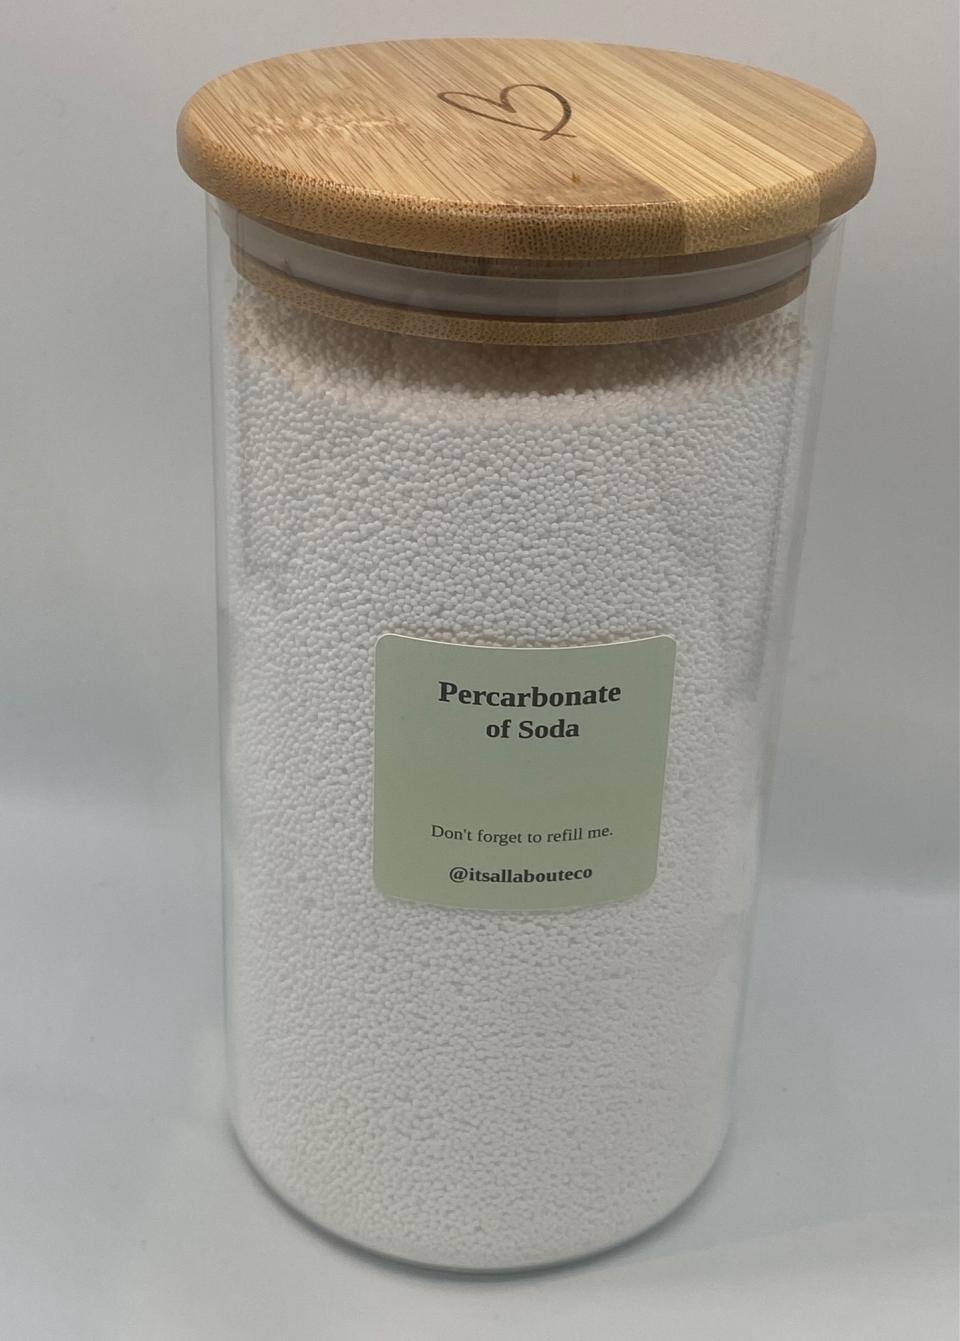 Percarbonate of Soda Oxygen Bleach with Glass Jar